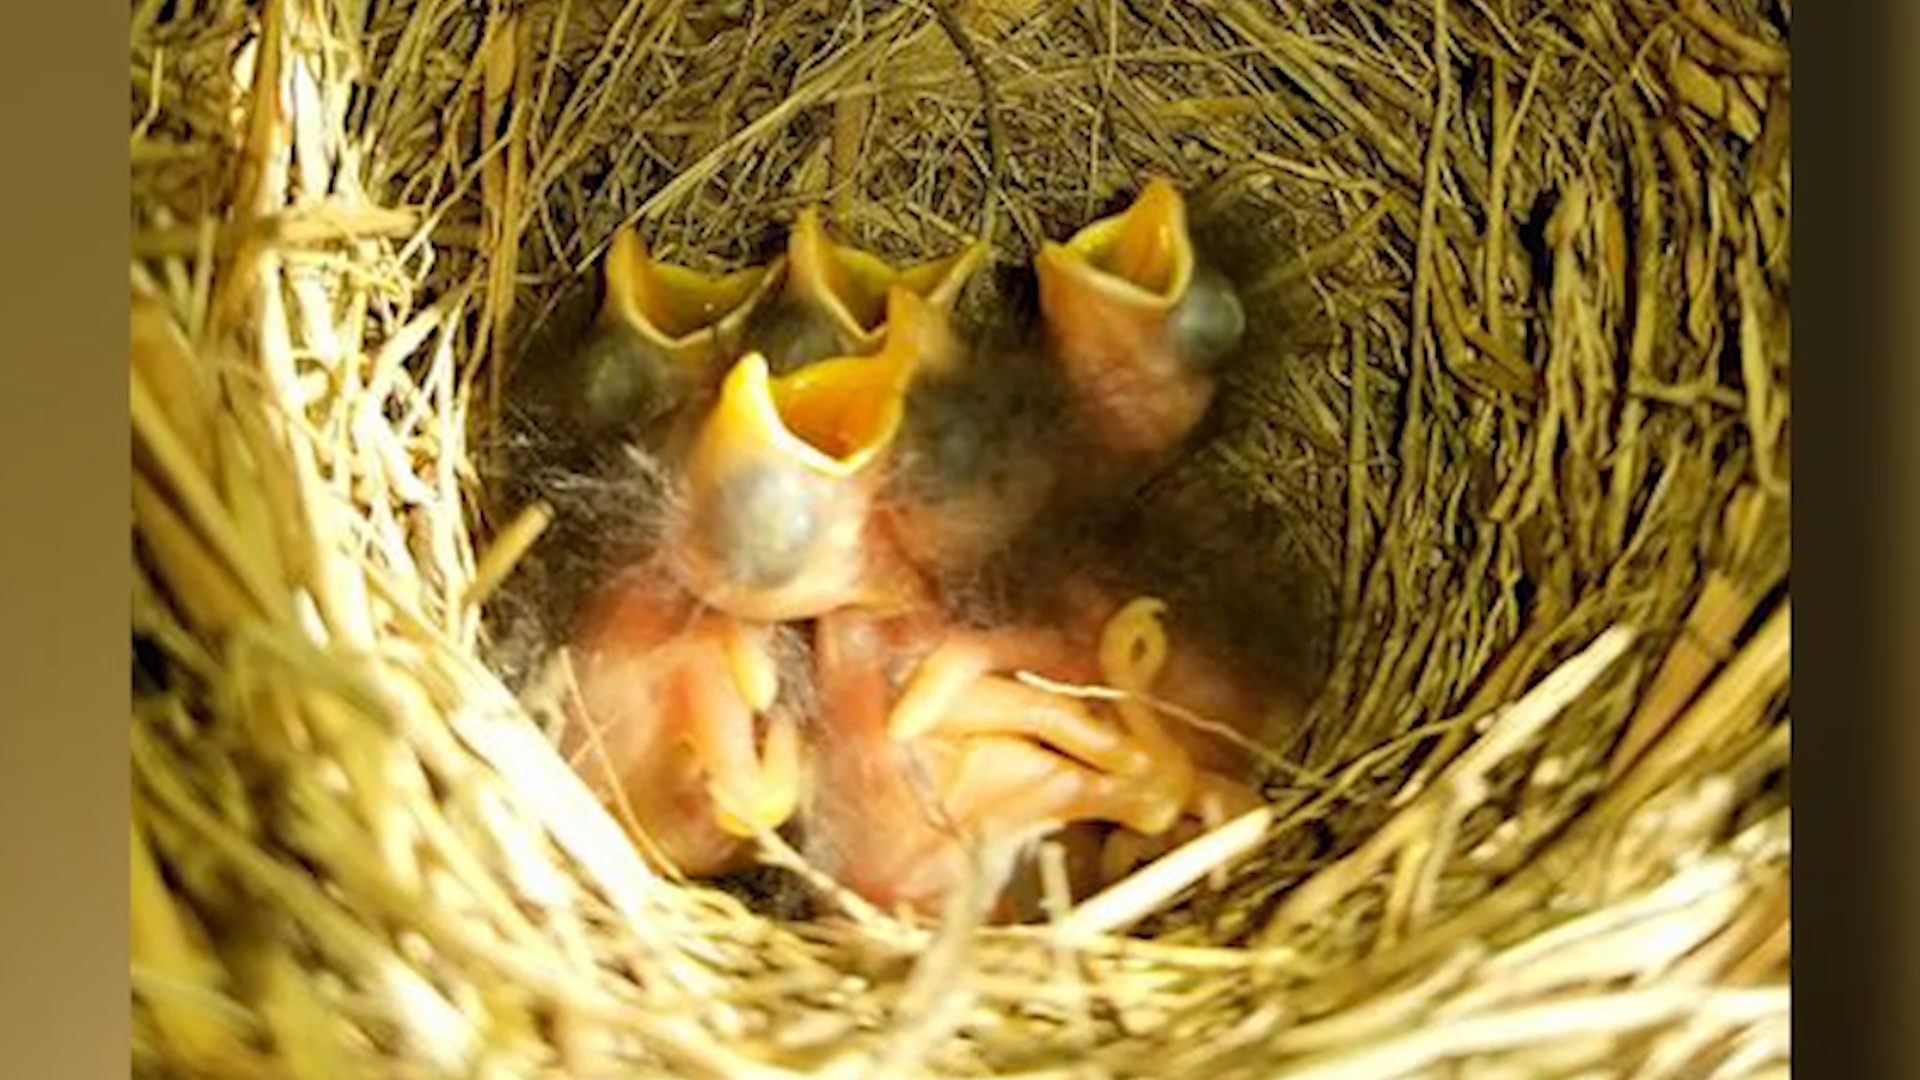 Picking up baby birds can do more harm than good